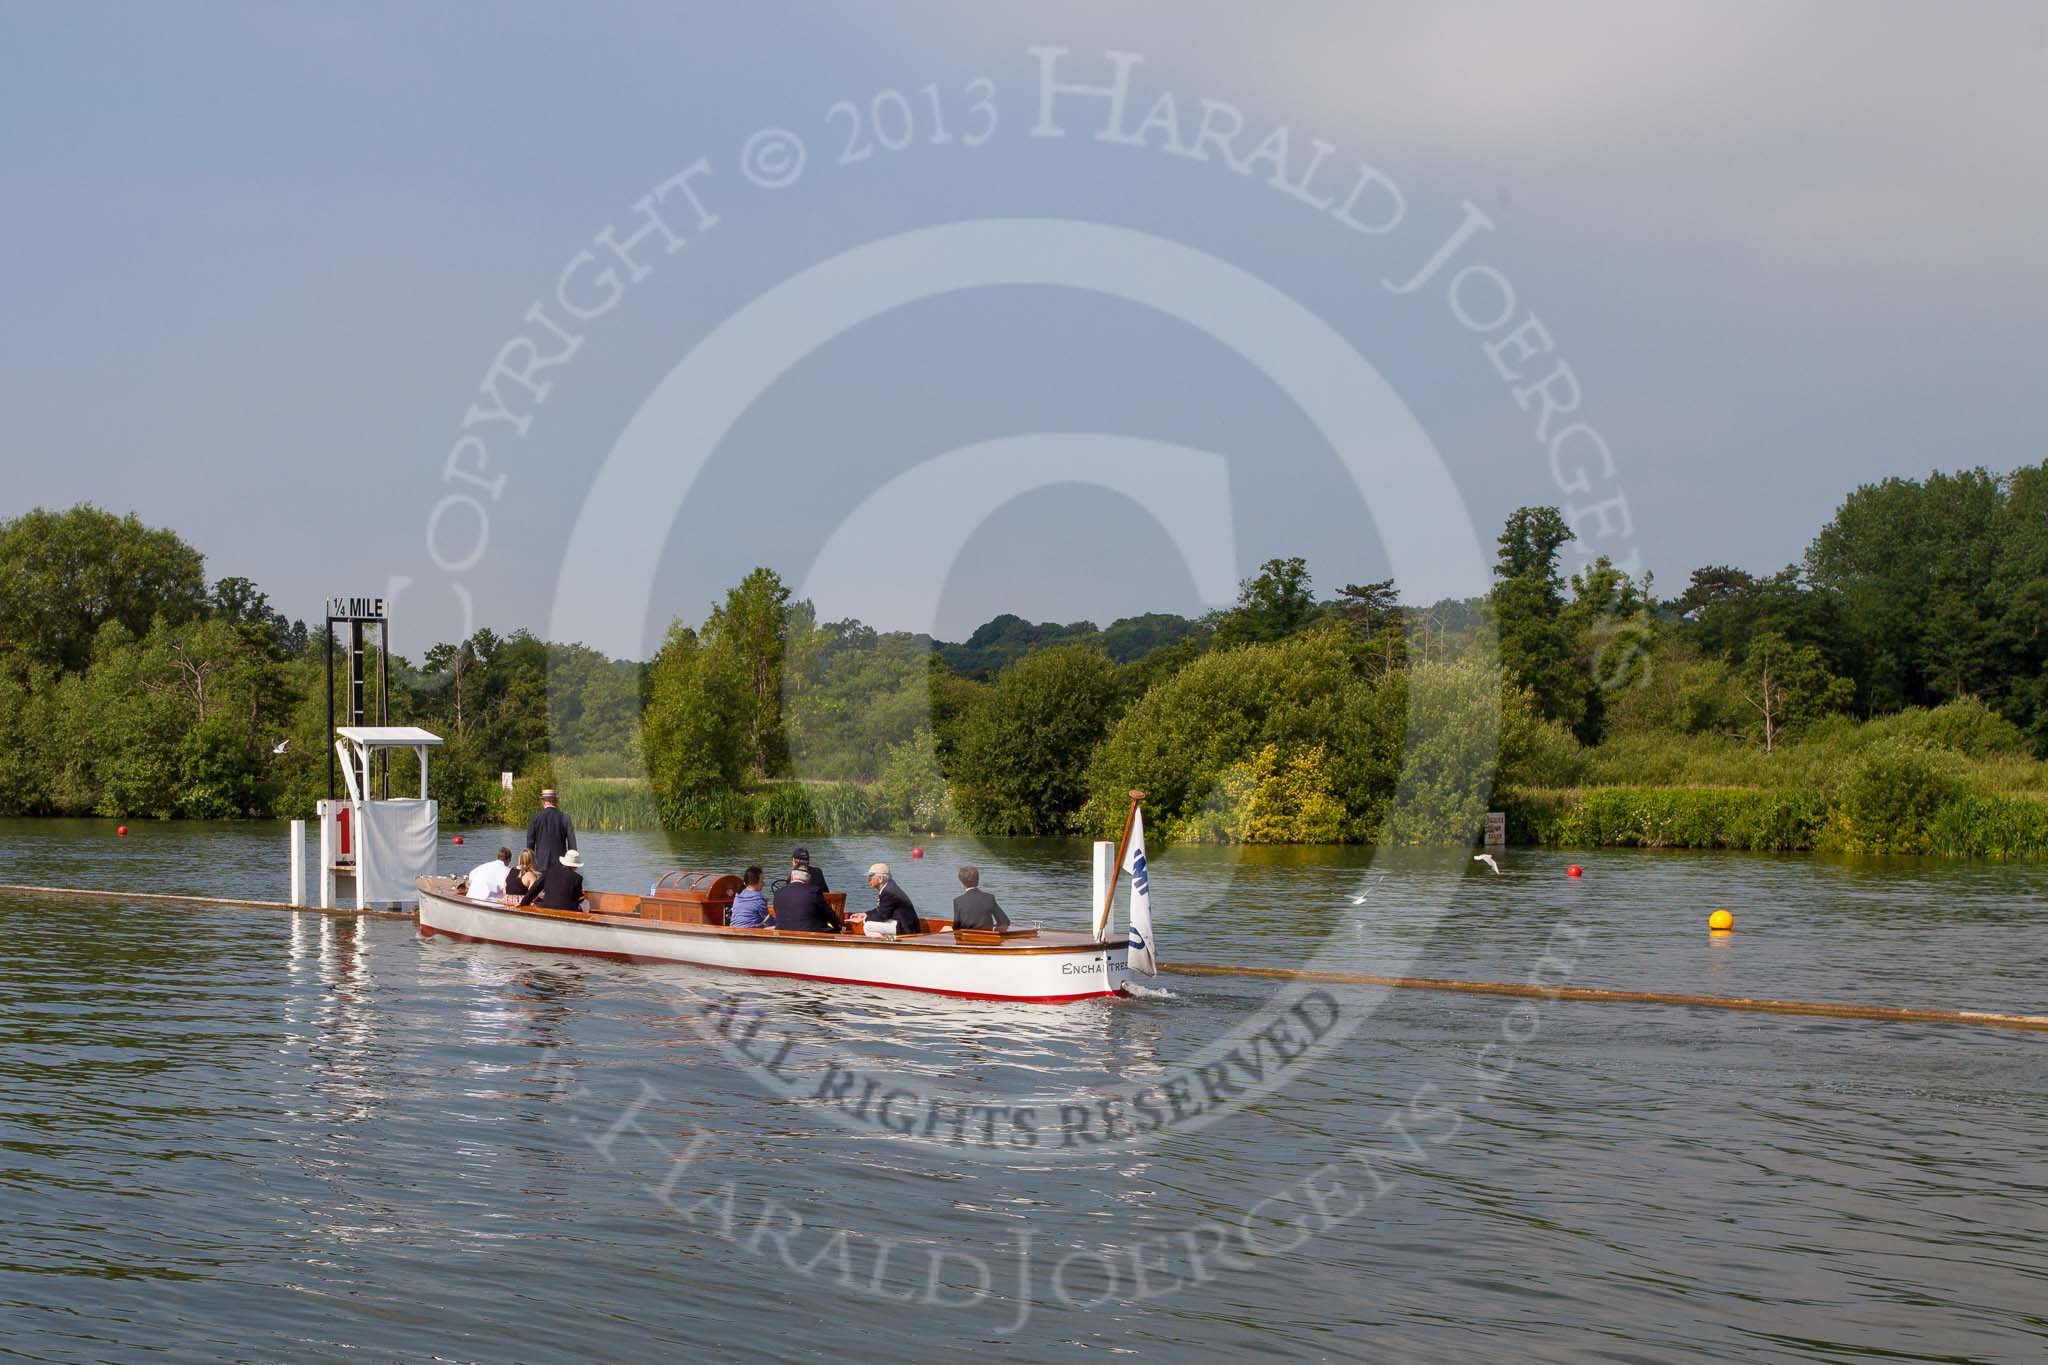 Henley Royal Regatta 2013, Saturday: Minutes before the Saturday races begin - a race official is dropped at the 1/4 mile marker. Image #59, 06 July 2013 09:44 River Thames, Henley on Thames, UK